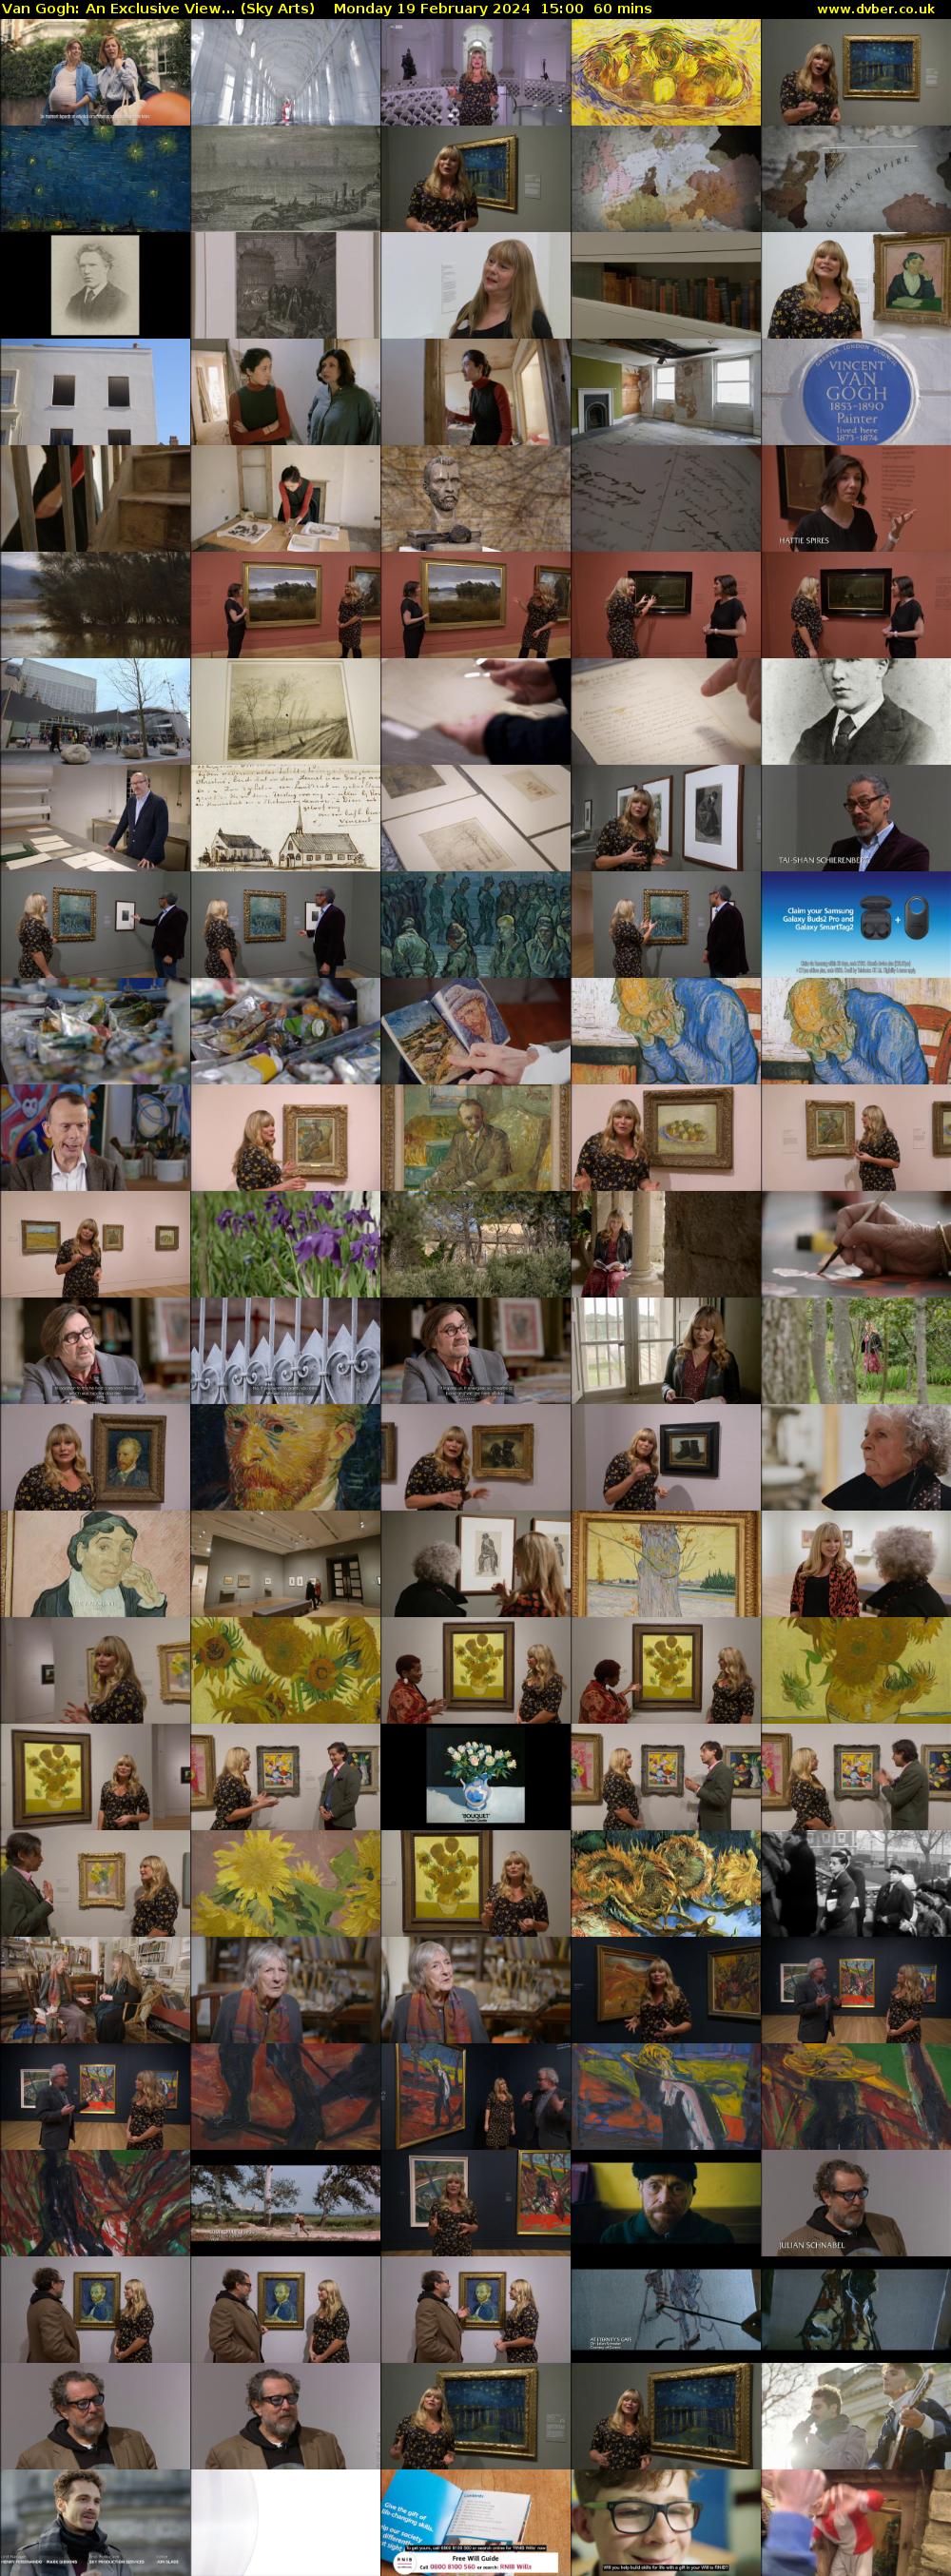 Van Gogh: An Exclusive View... (Sky Arts) Monday 19 February 2024 15:00 - 16:00